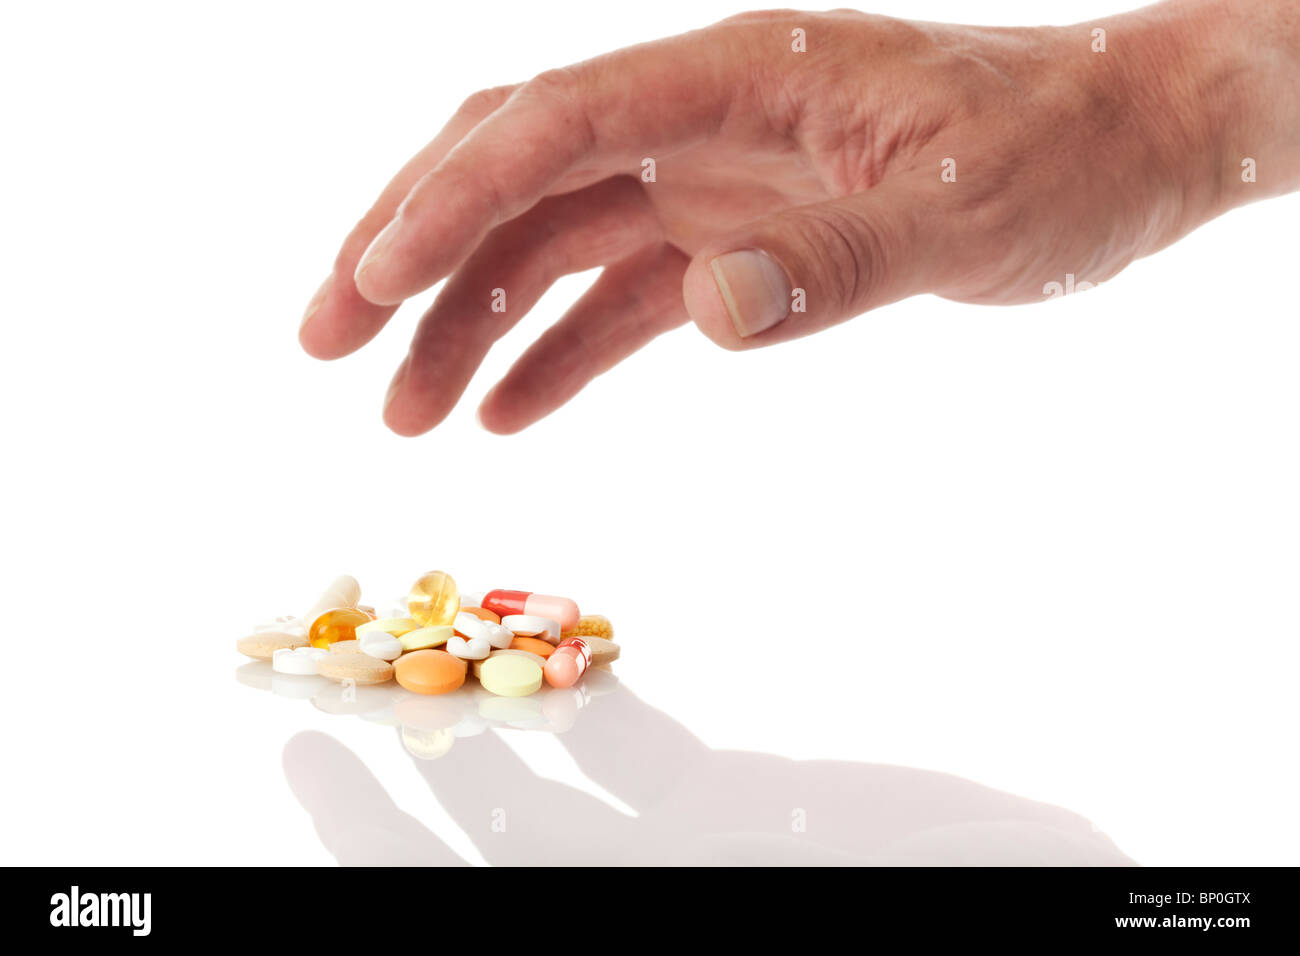 drug abuse - hand reaching out for a pile of medicine pills Stock Photo